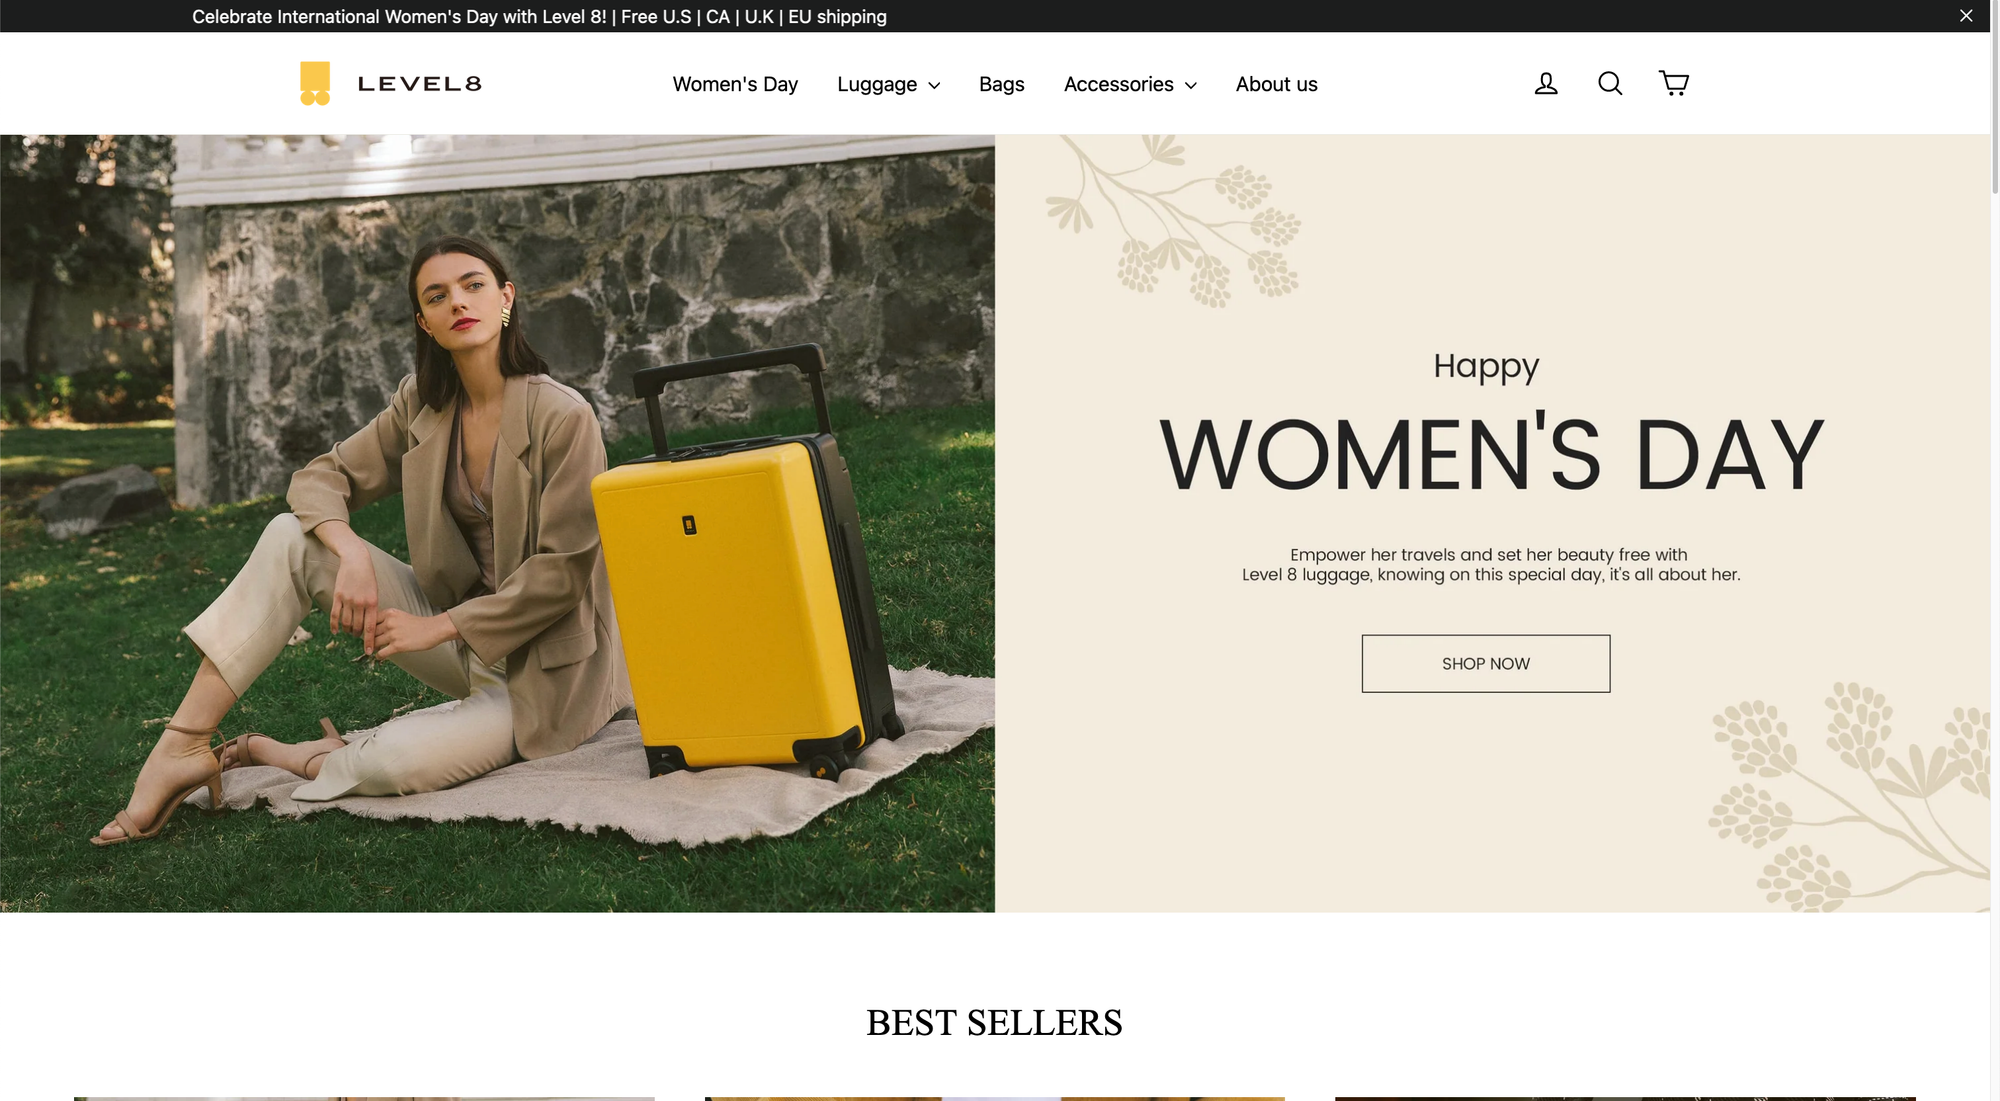 screenshot of level8bags.com, "Happy WOMEN'S DAY Empower her travels and set her beauty free with Level 8 luggage, knowing on this special day, it's all about her."